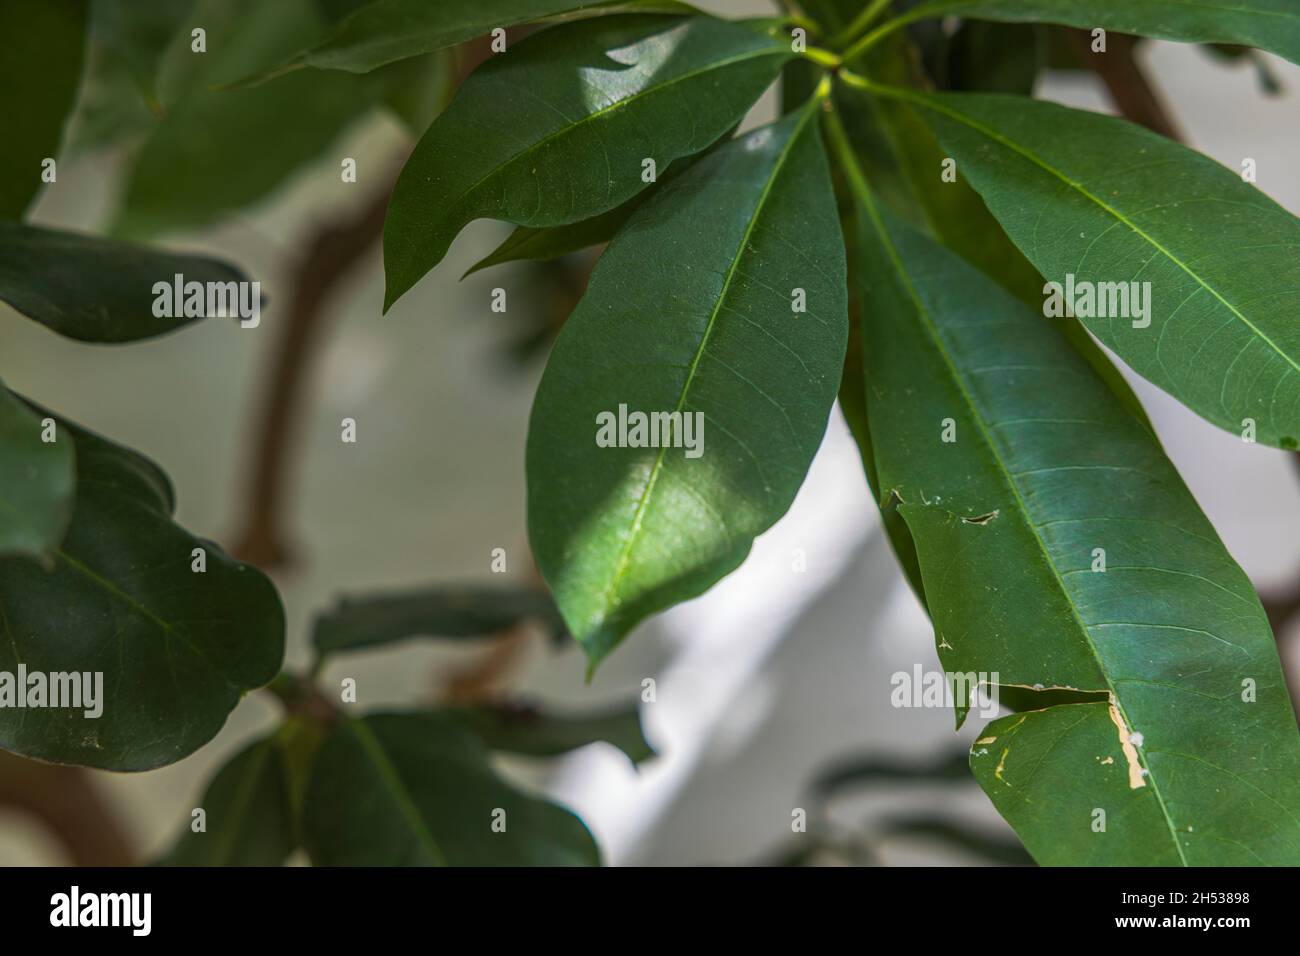 Close-up view of the leaves of poisonous tropical plant Rauvolfia mombasiana. Sweden. Stock Photo